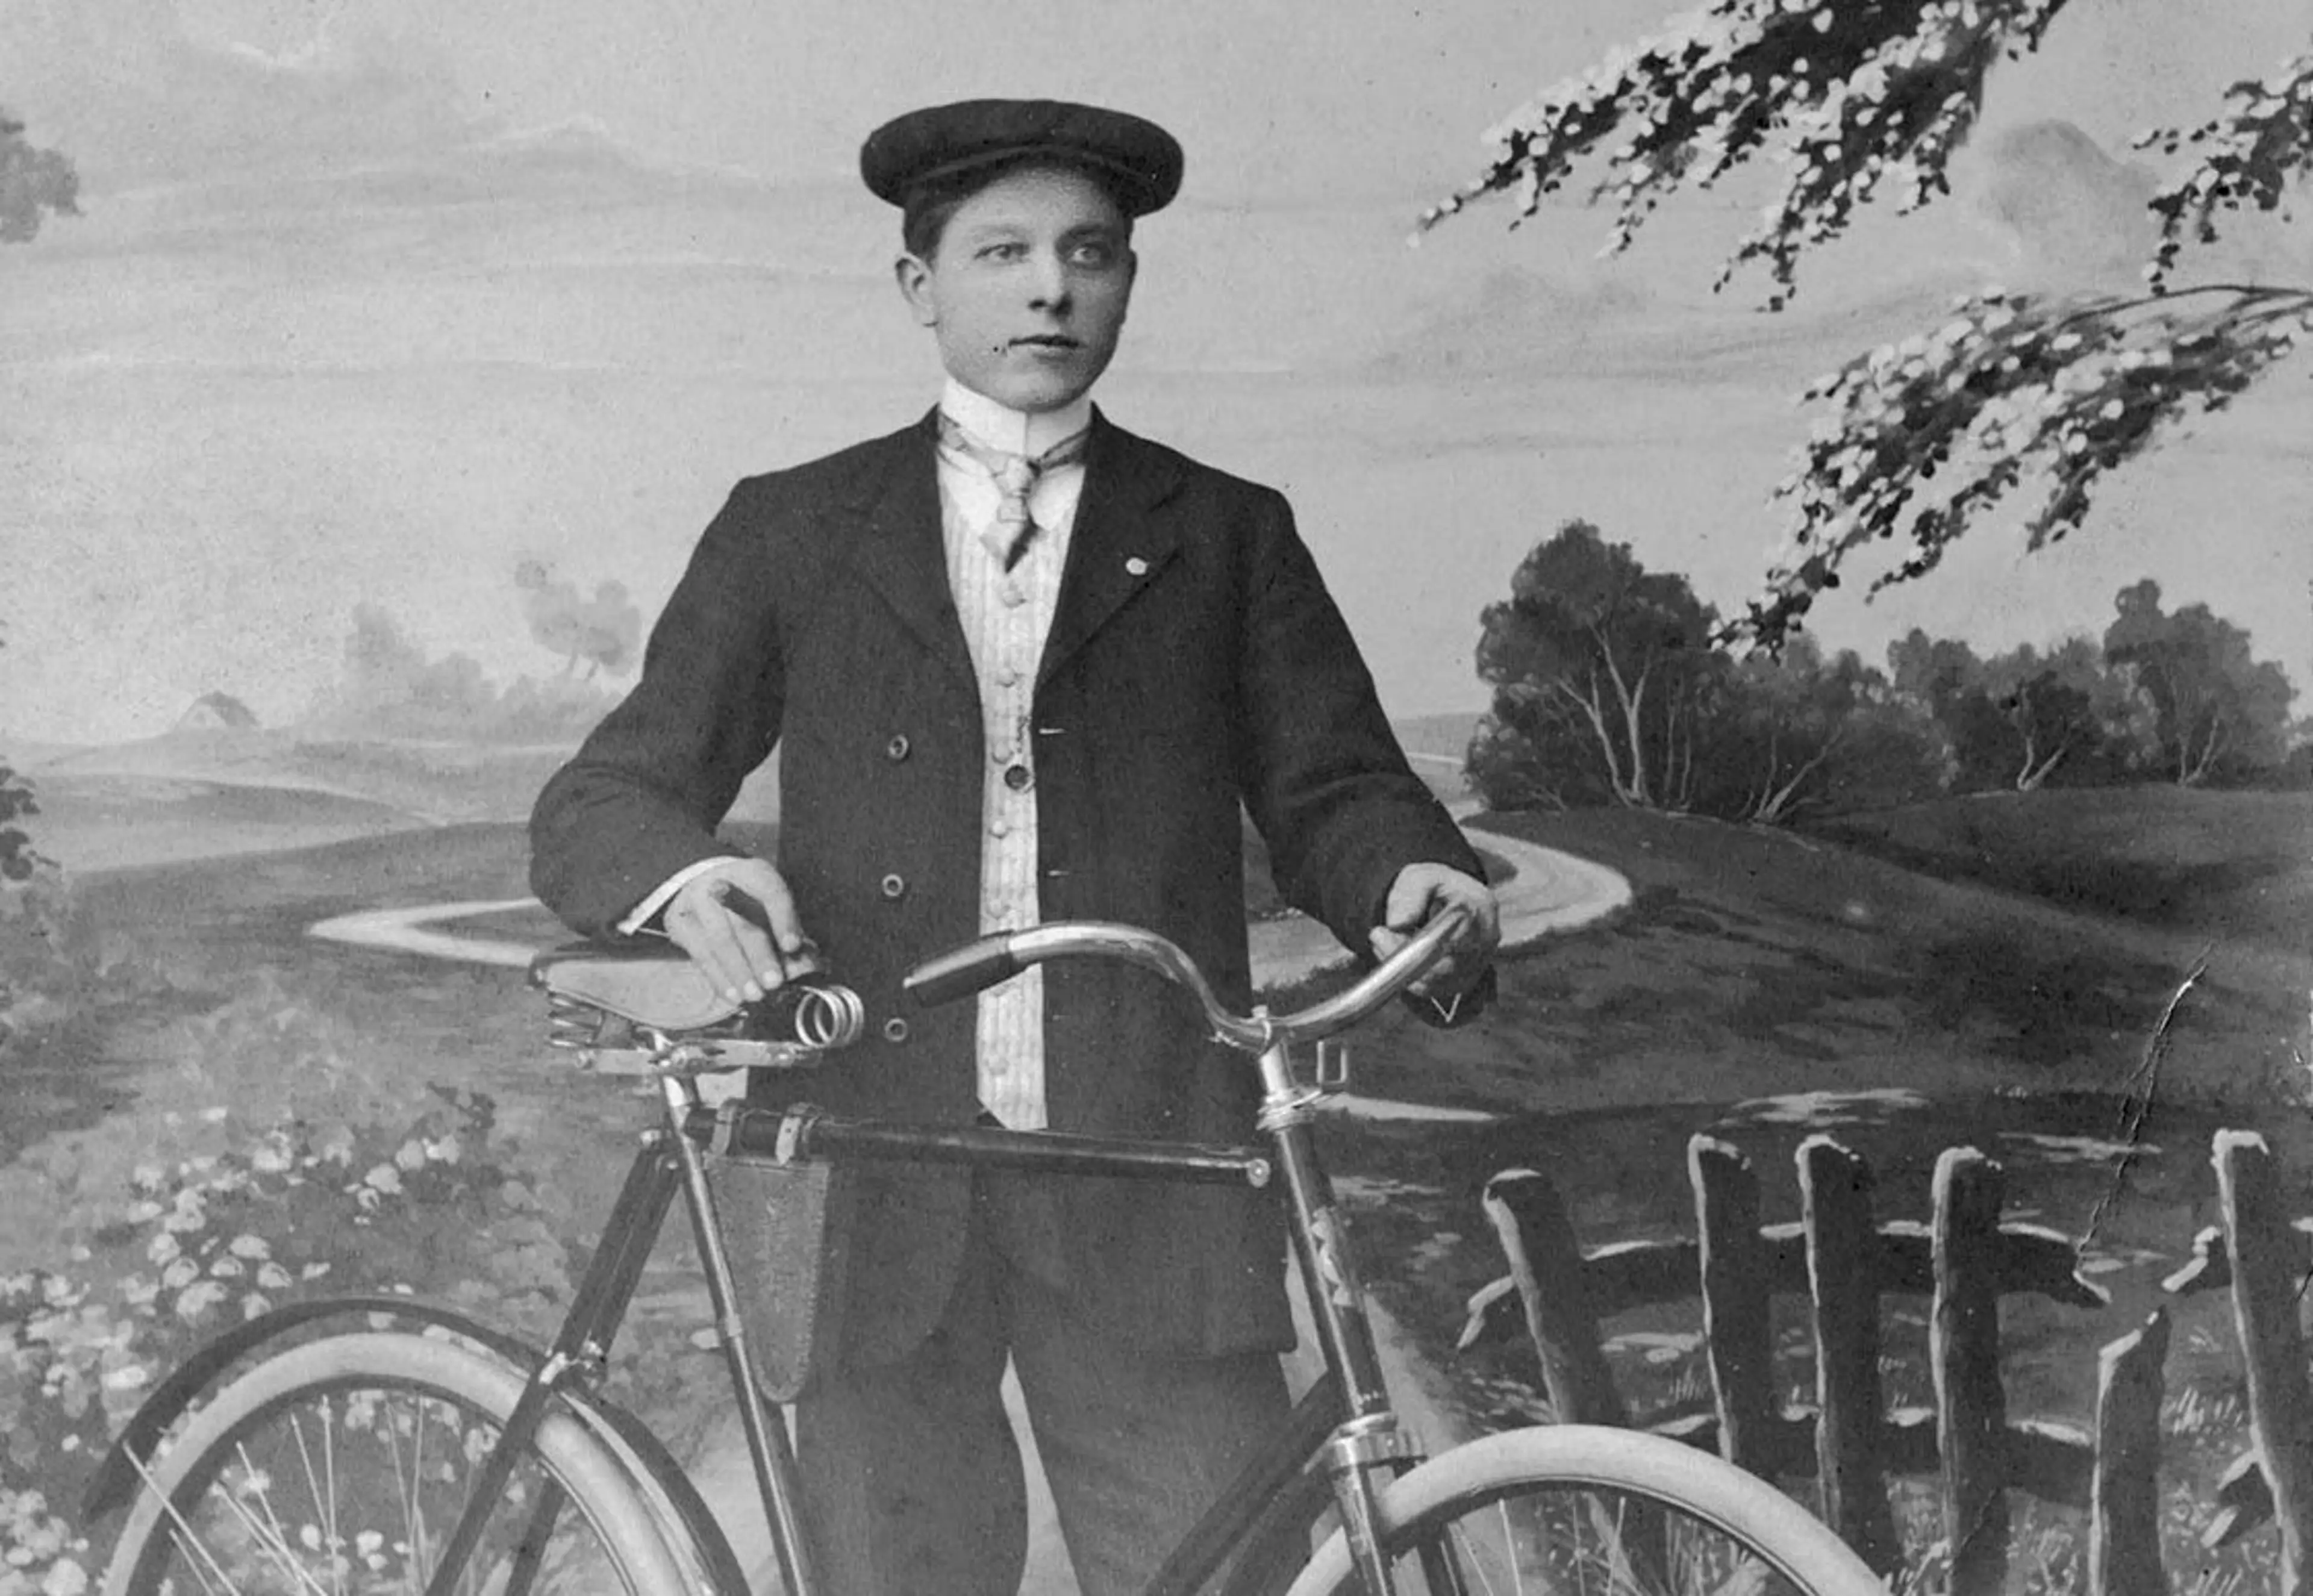 A young Ole Kirk standing by a bicycle